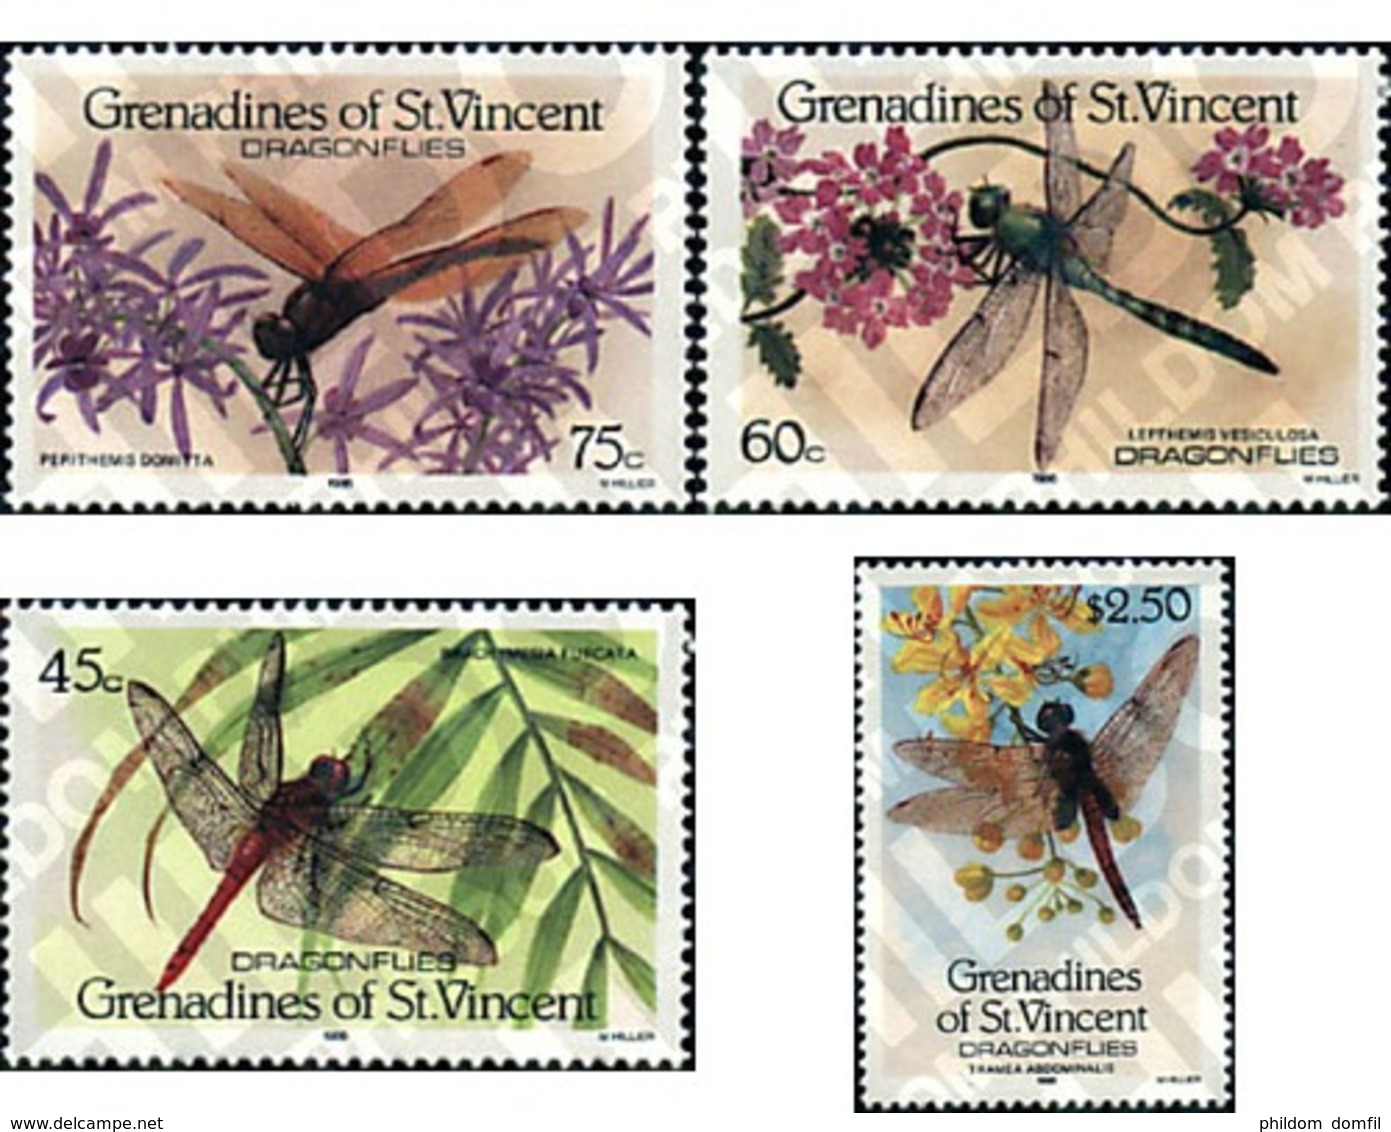 Ref. 91588 * MNH * - ST. VINCENT AND THE GRENADINES. 1986. DRAGONFLIES . LIBELULAS - Spiders